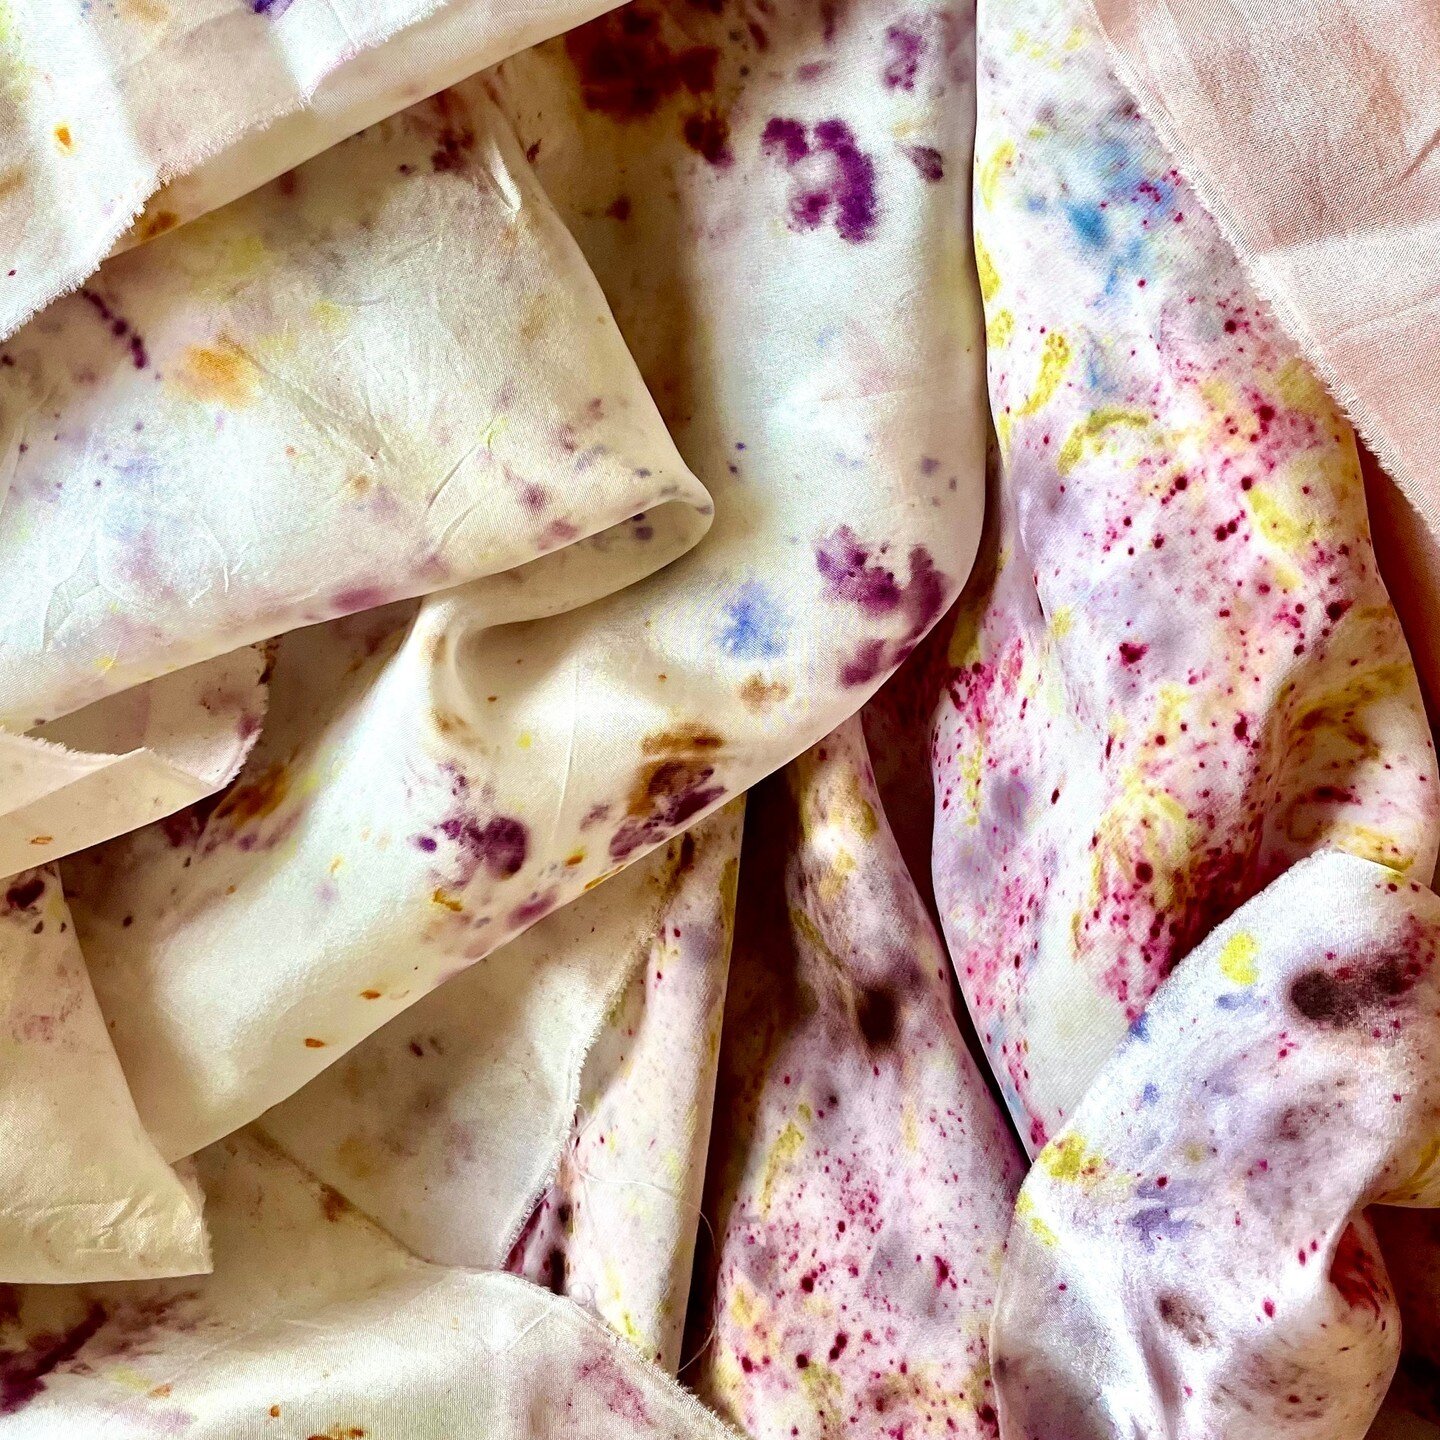 Happy Beltane!
The first day of Summer &amp; I&rsquo;m getting excited about all the flowers to play with!

The patterns from bundle dyeing are always a delightful surprise and imbued with the beauty of the flowers themselves.

I love to work with th